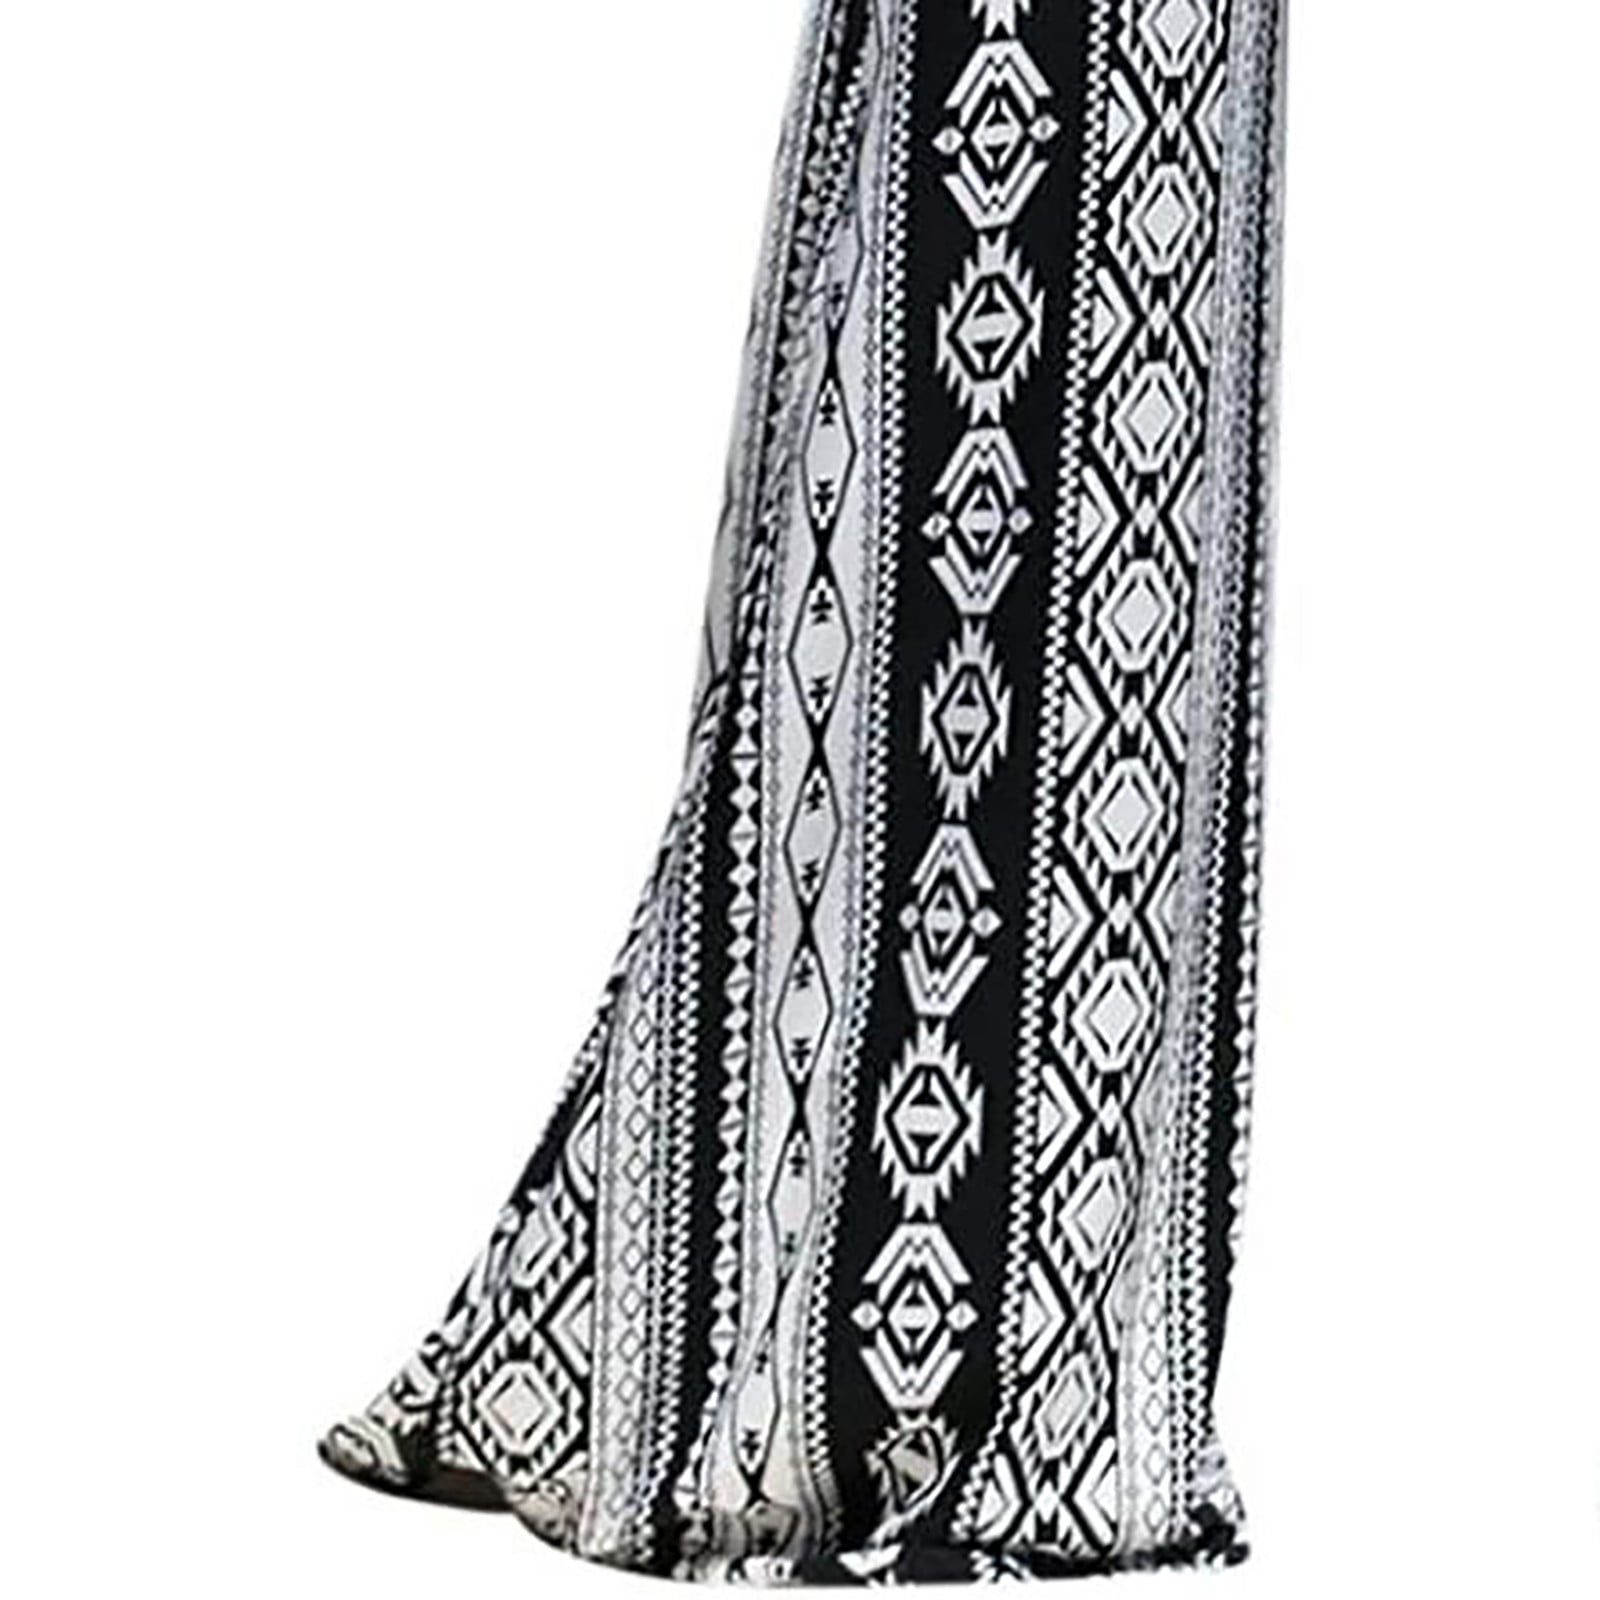 Womens Flare Yoga Pants W/ Long Attached Skirt, Flare Bellbottom Pants  SASSY PANTS LONG Skirt, Bellydance Tribal Clothing, Festival, Dance 